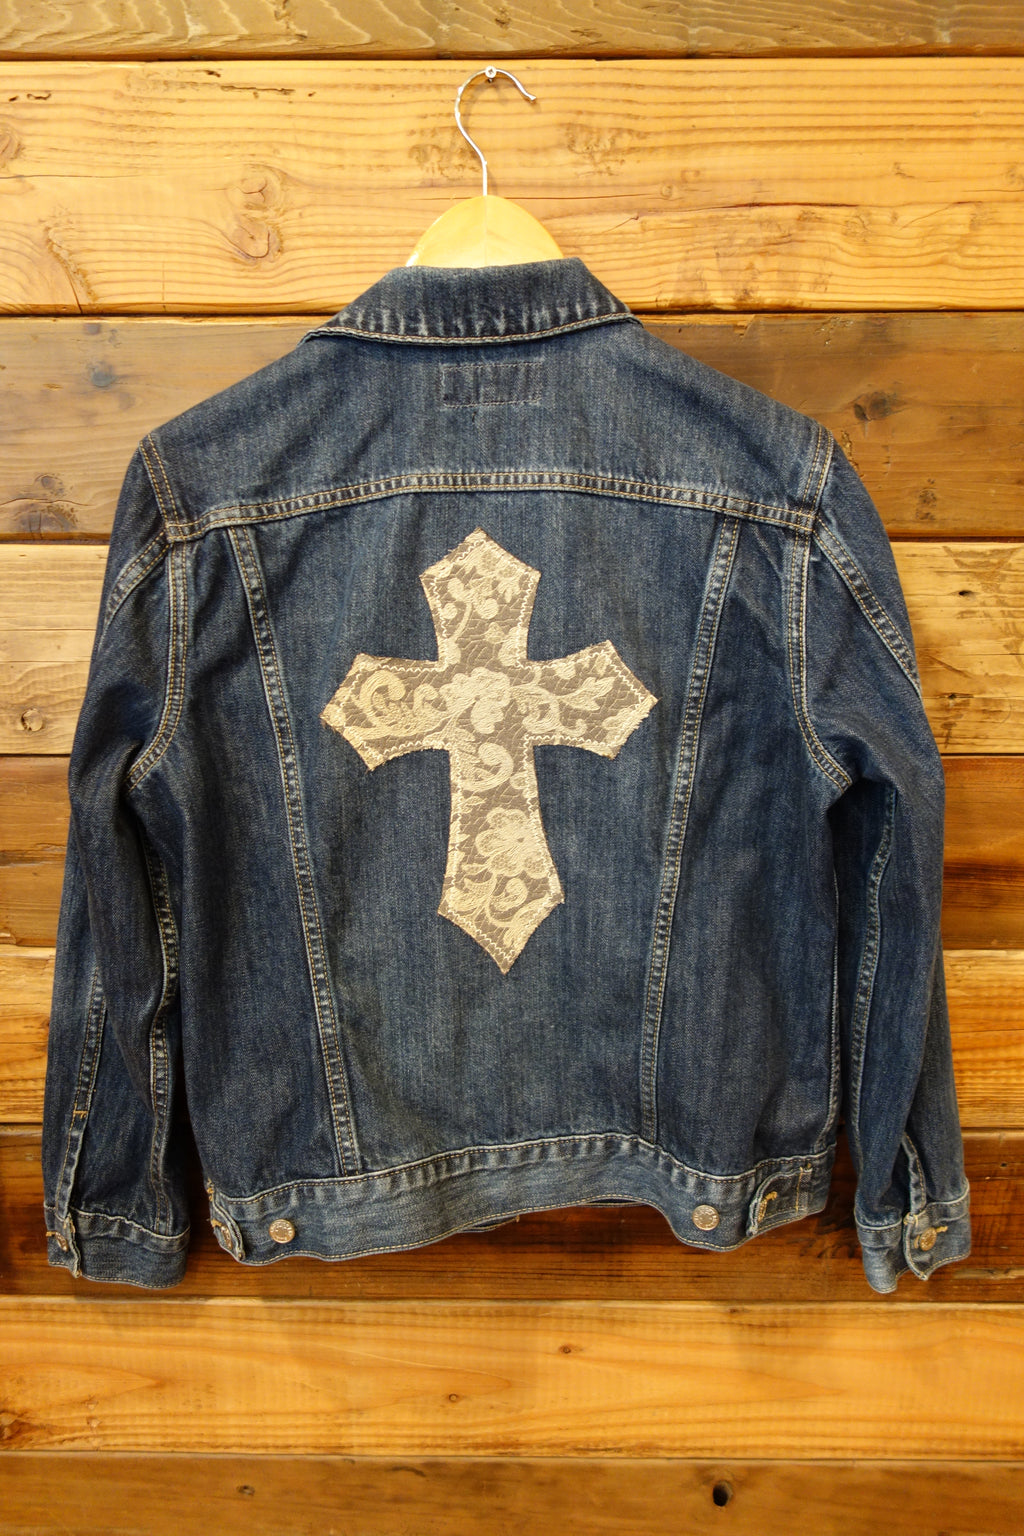 Lucky Brand jean jacket, one of a kind, cross